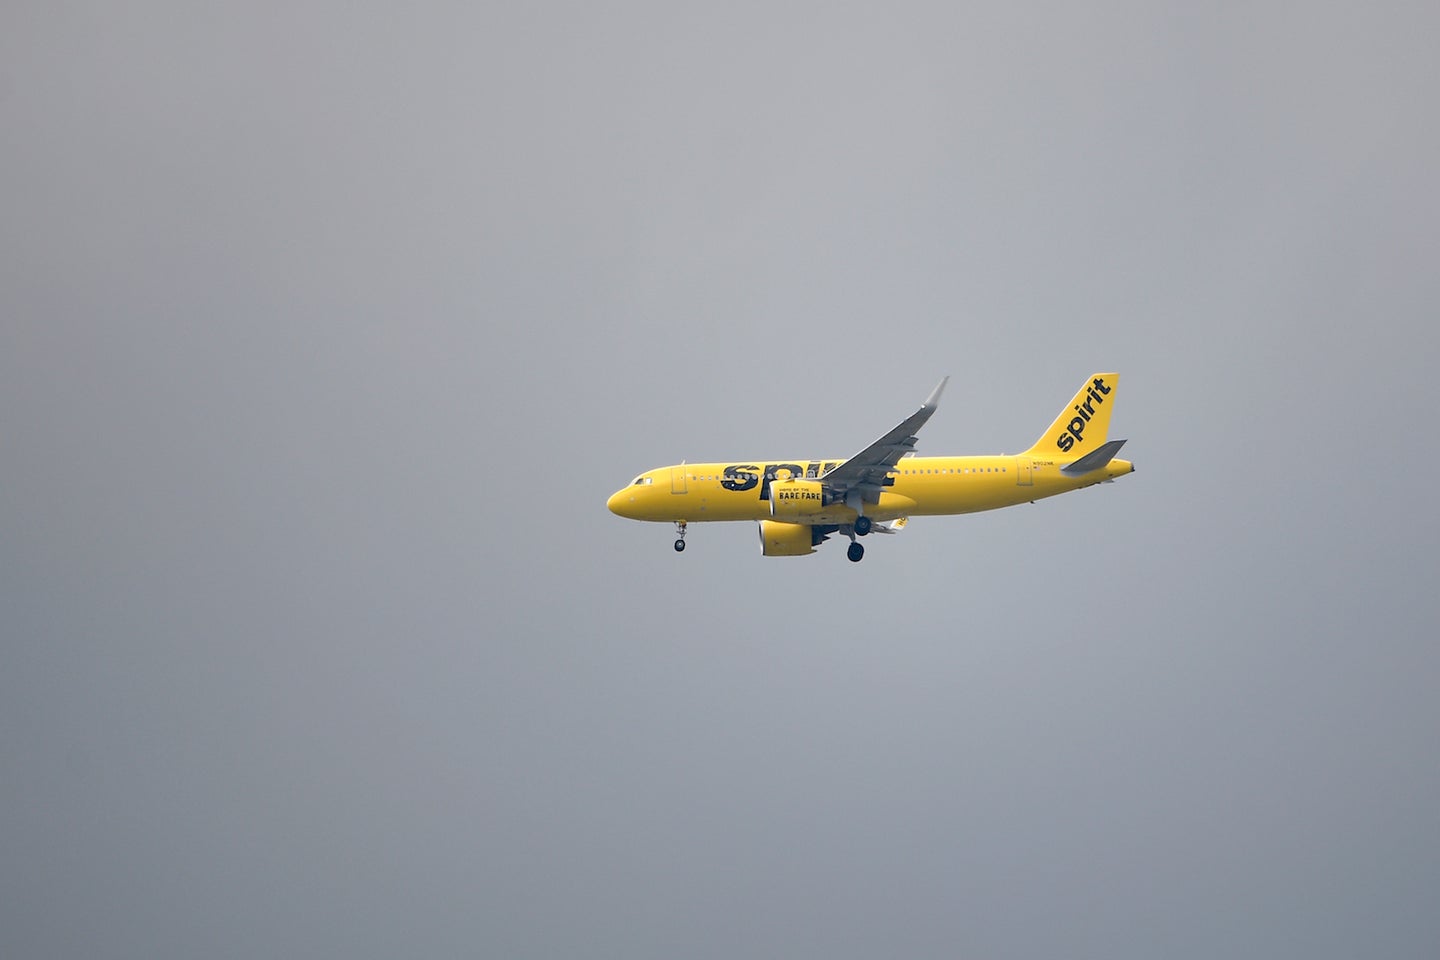 This Spirit Airlines Flight Late More Than 50 Percent of the Time